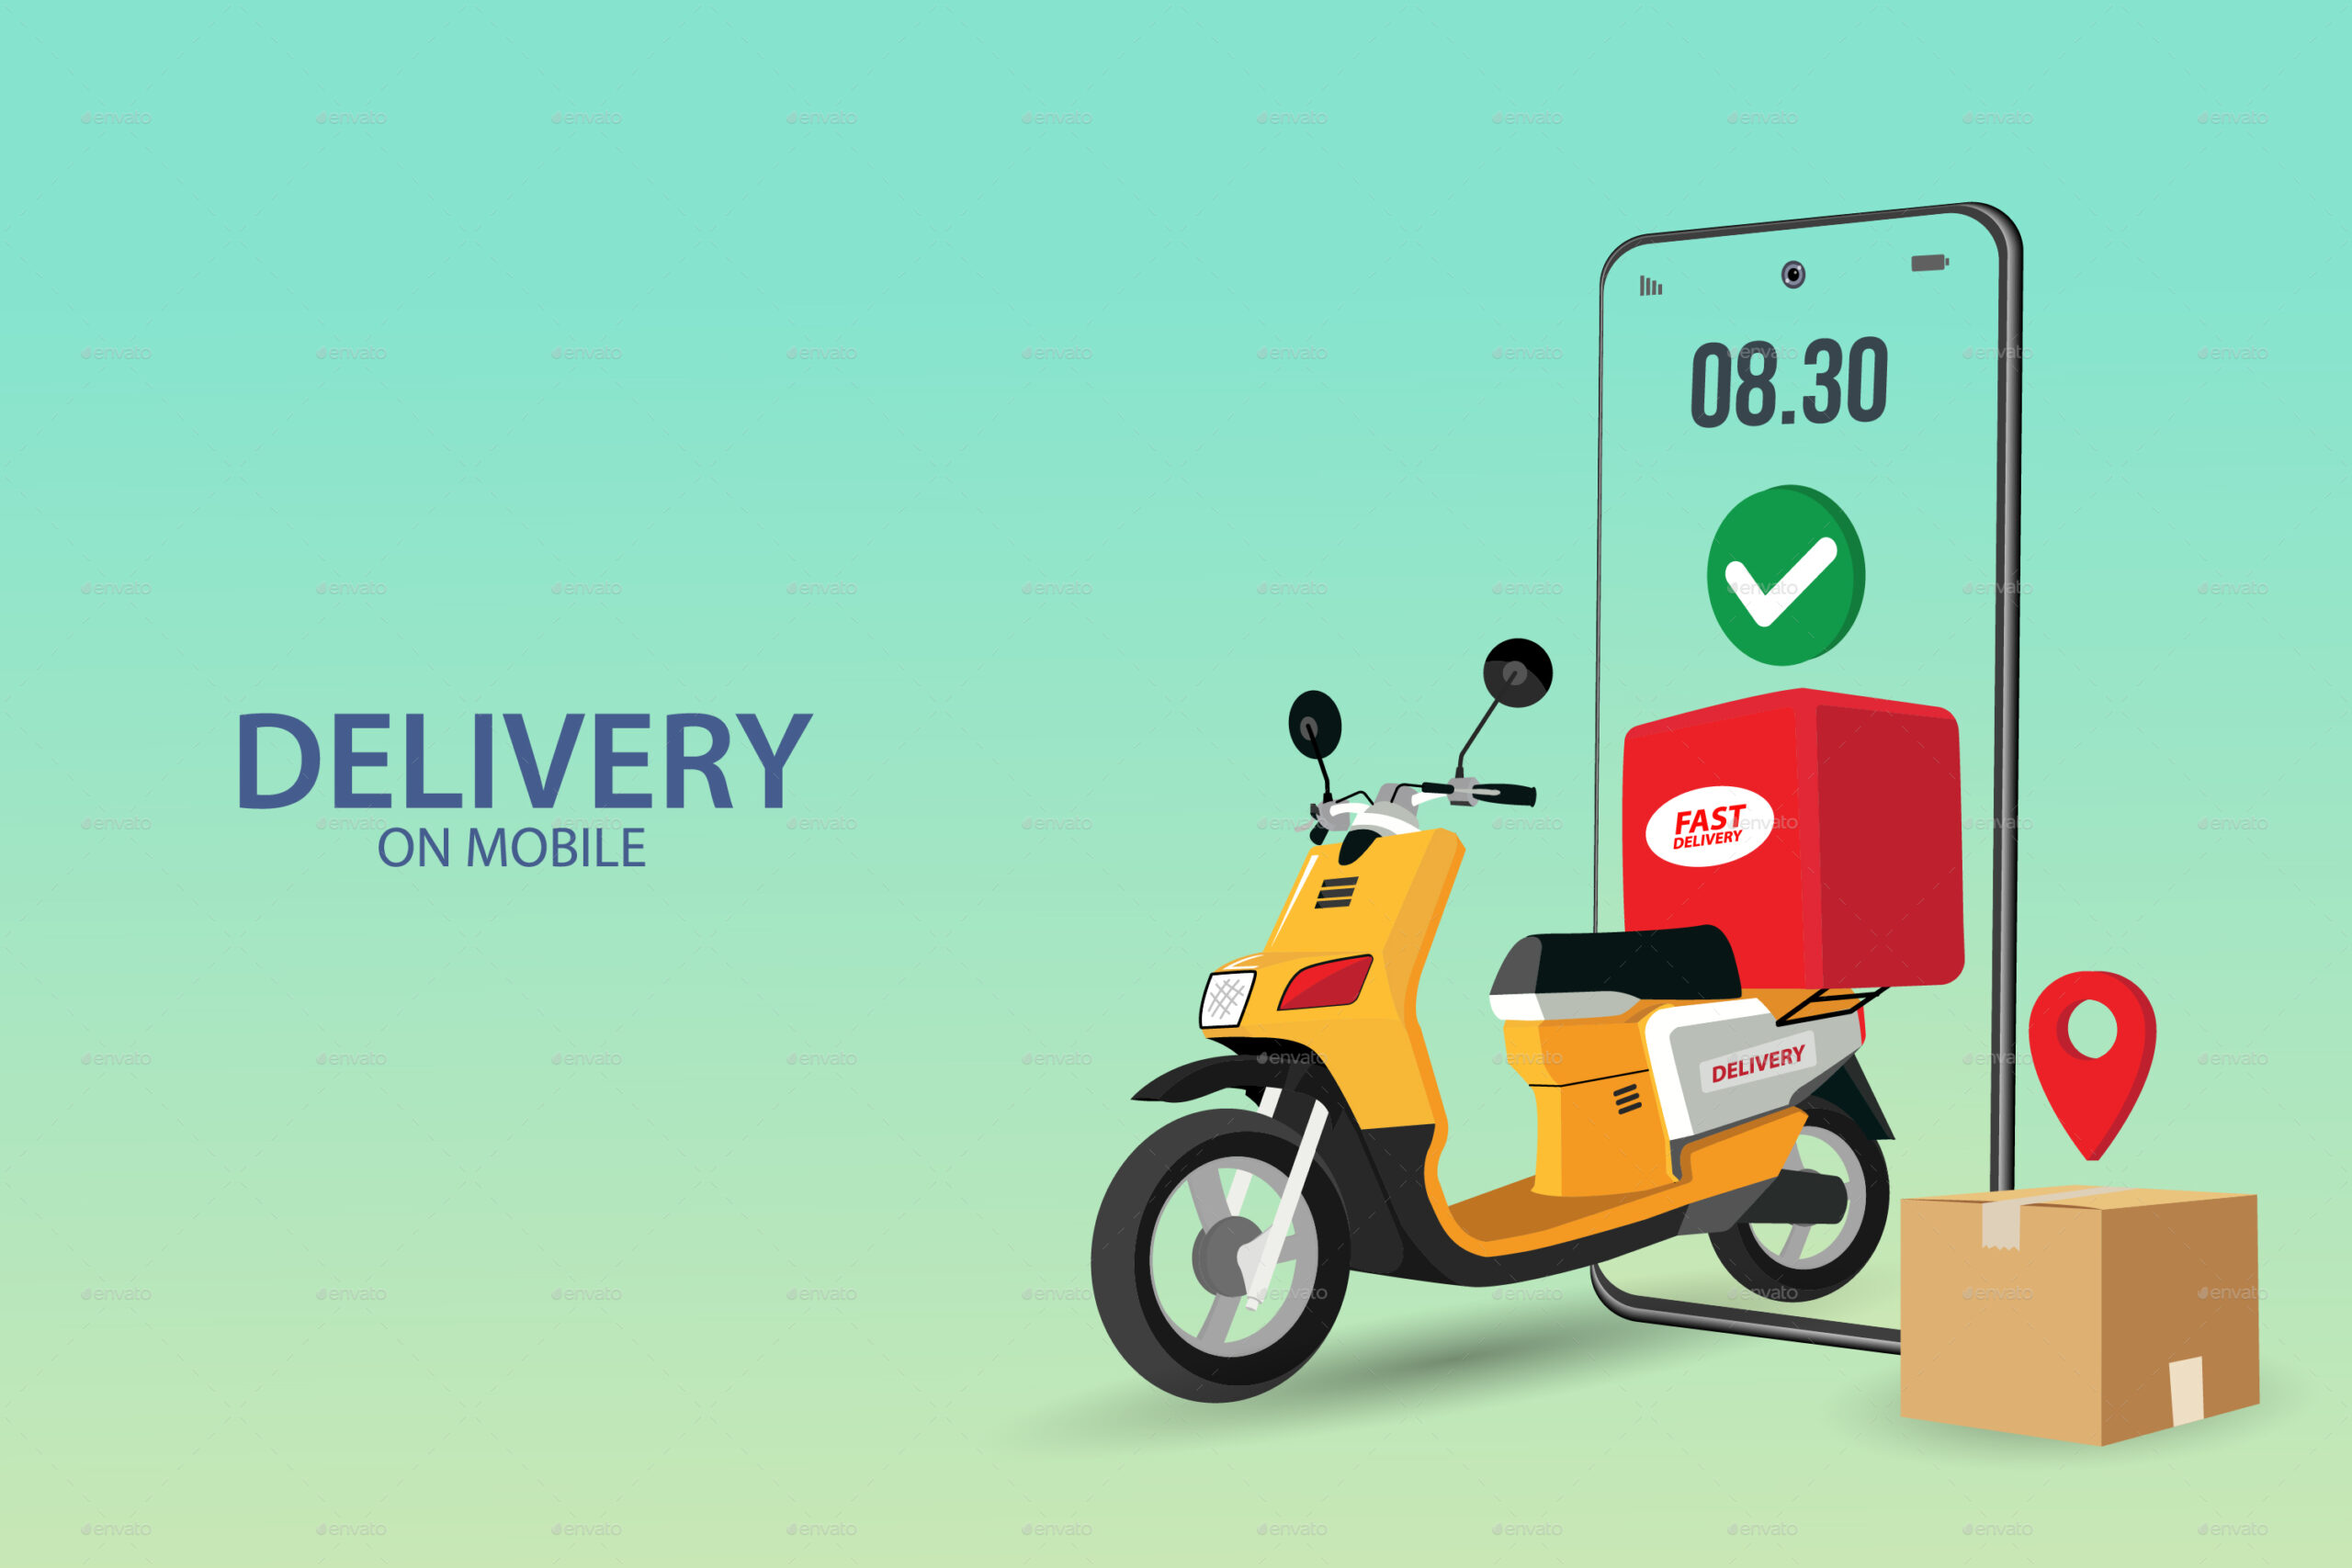 Fast delivery package